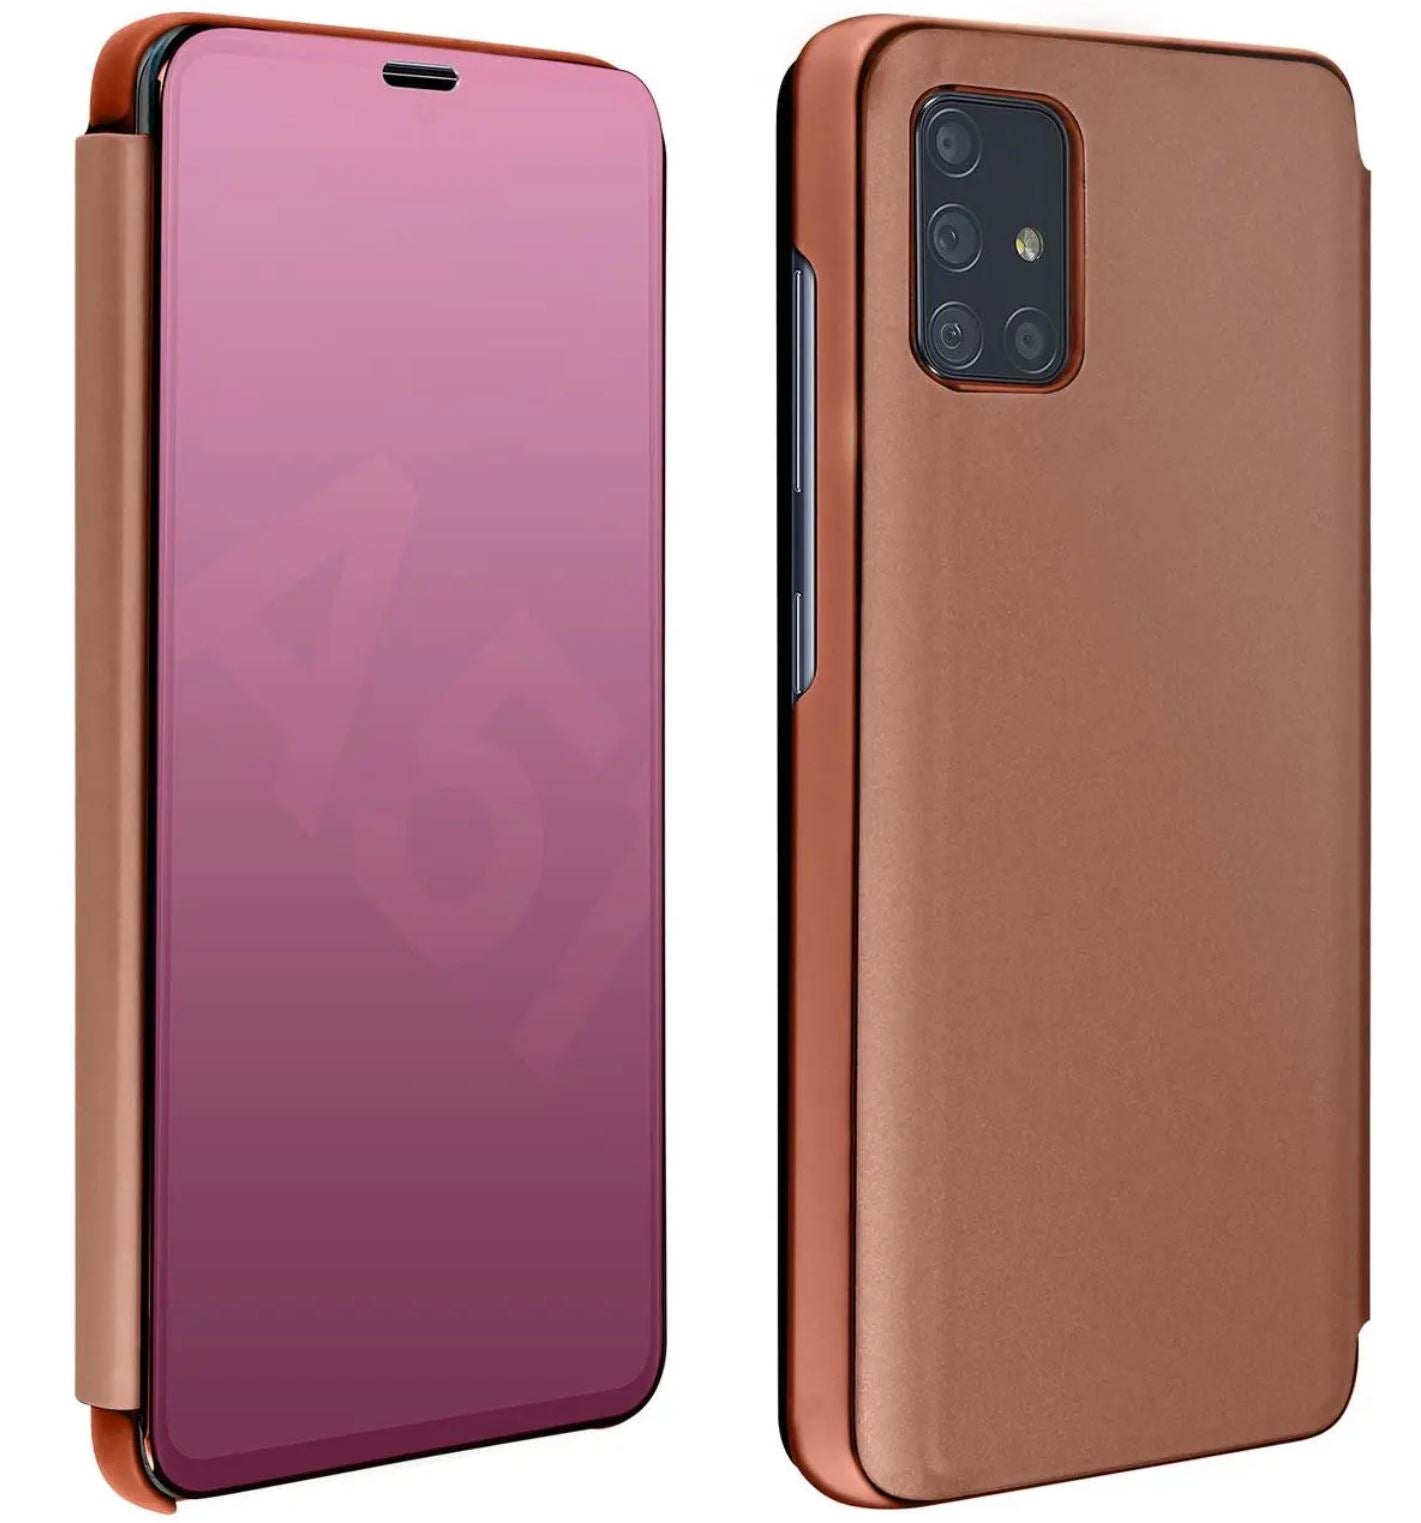 Galaxy A51 Clear View Cover Hoesje - Roze